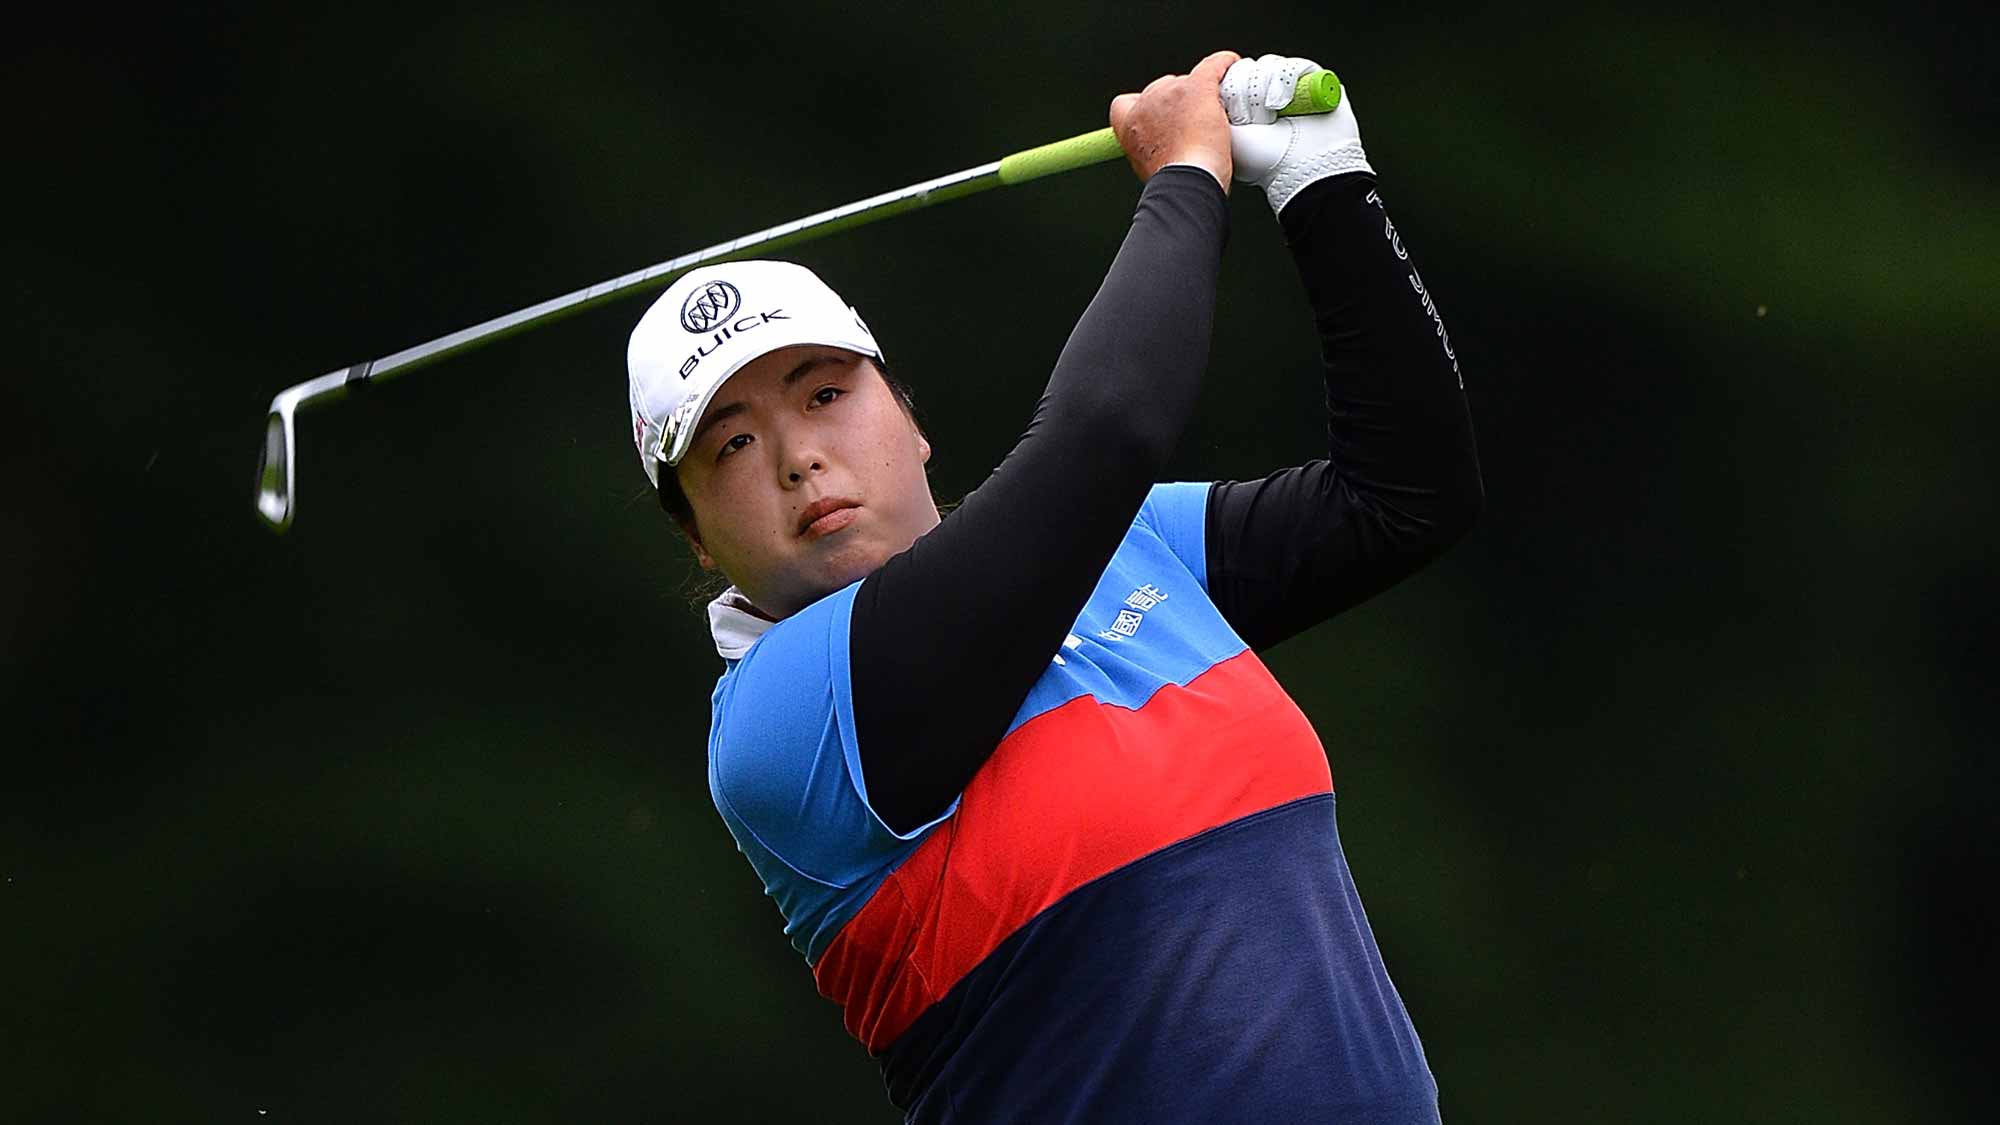 Shanshan Feng of China hits her second shot on the 3rd hole during the second round of the Ricoh Women's British Open at Woburn Golf Club